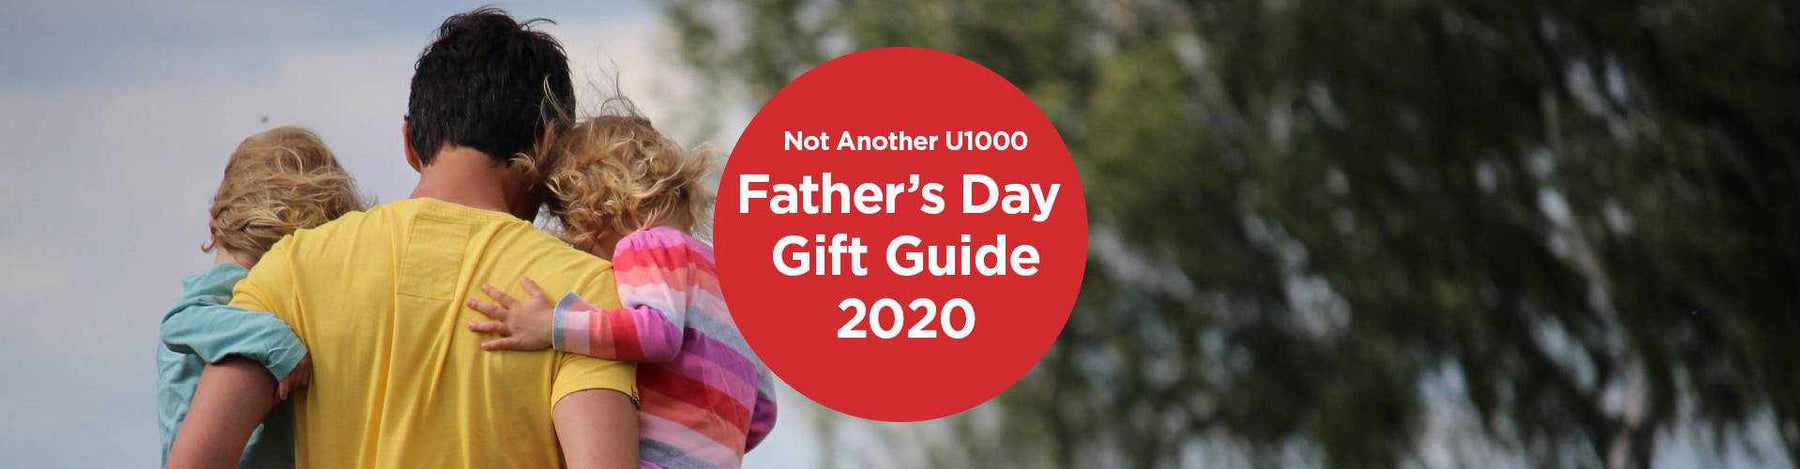 The Best Gifts For Father's Day 2020 - - BlackboxMyCar